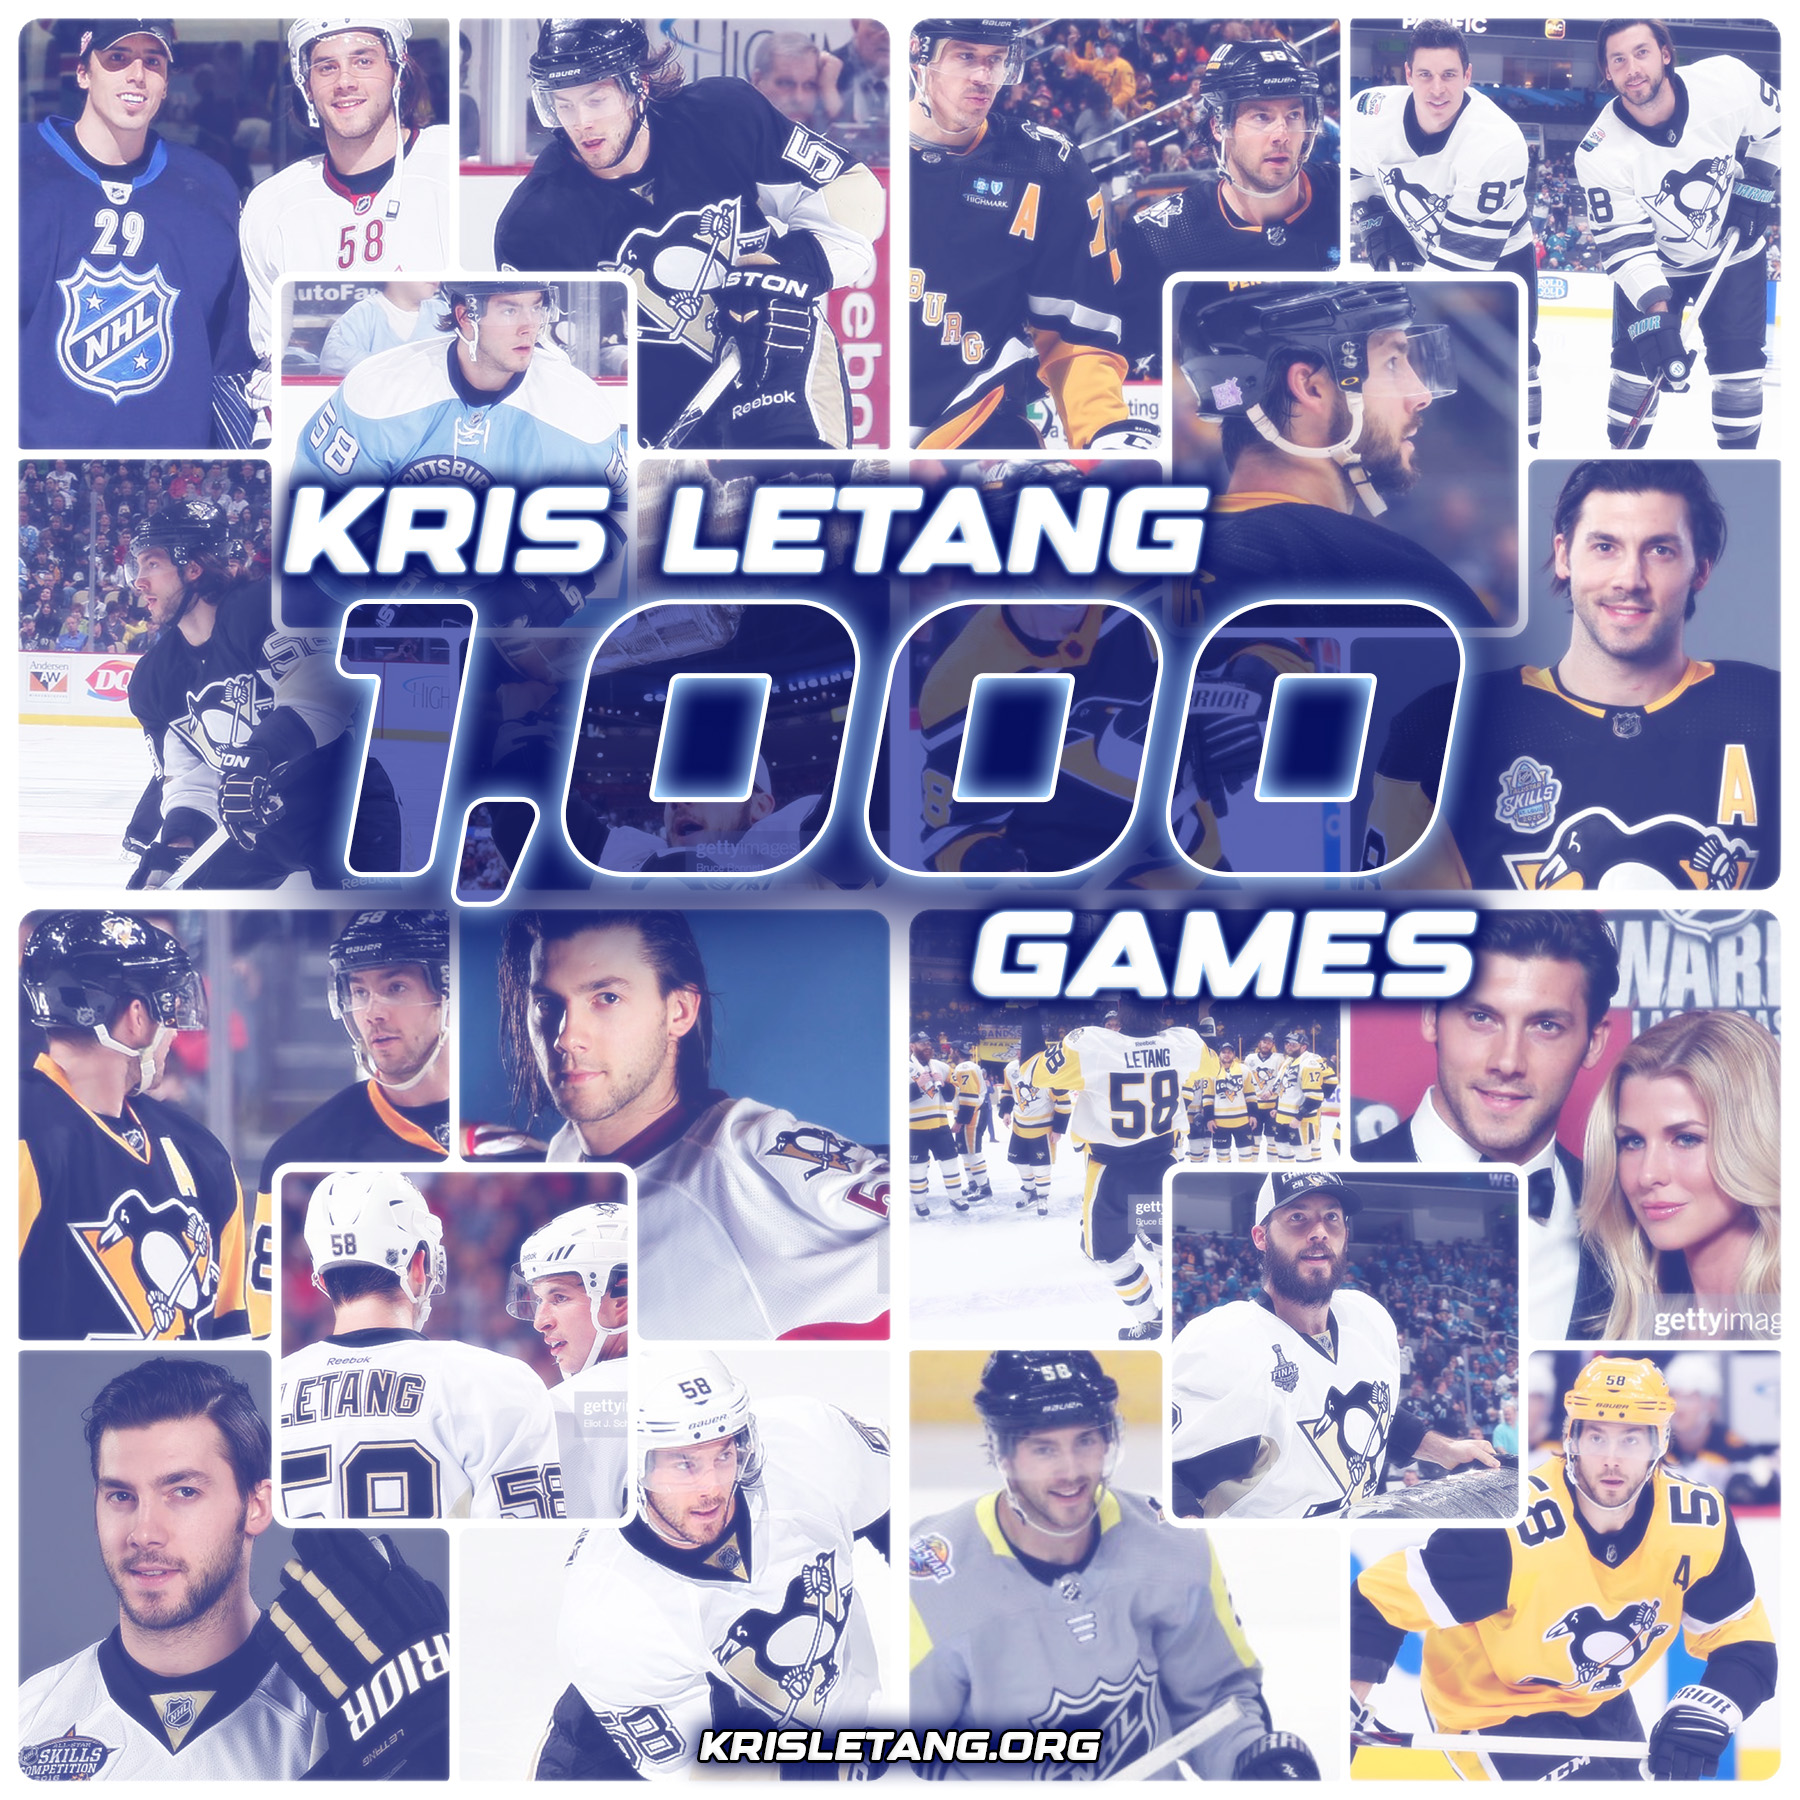 Graphic collage of Kris Letang hockey photos to celebrate the 1,000th game